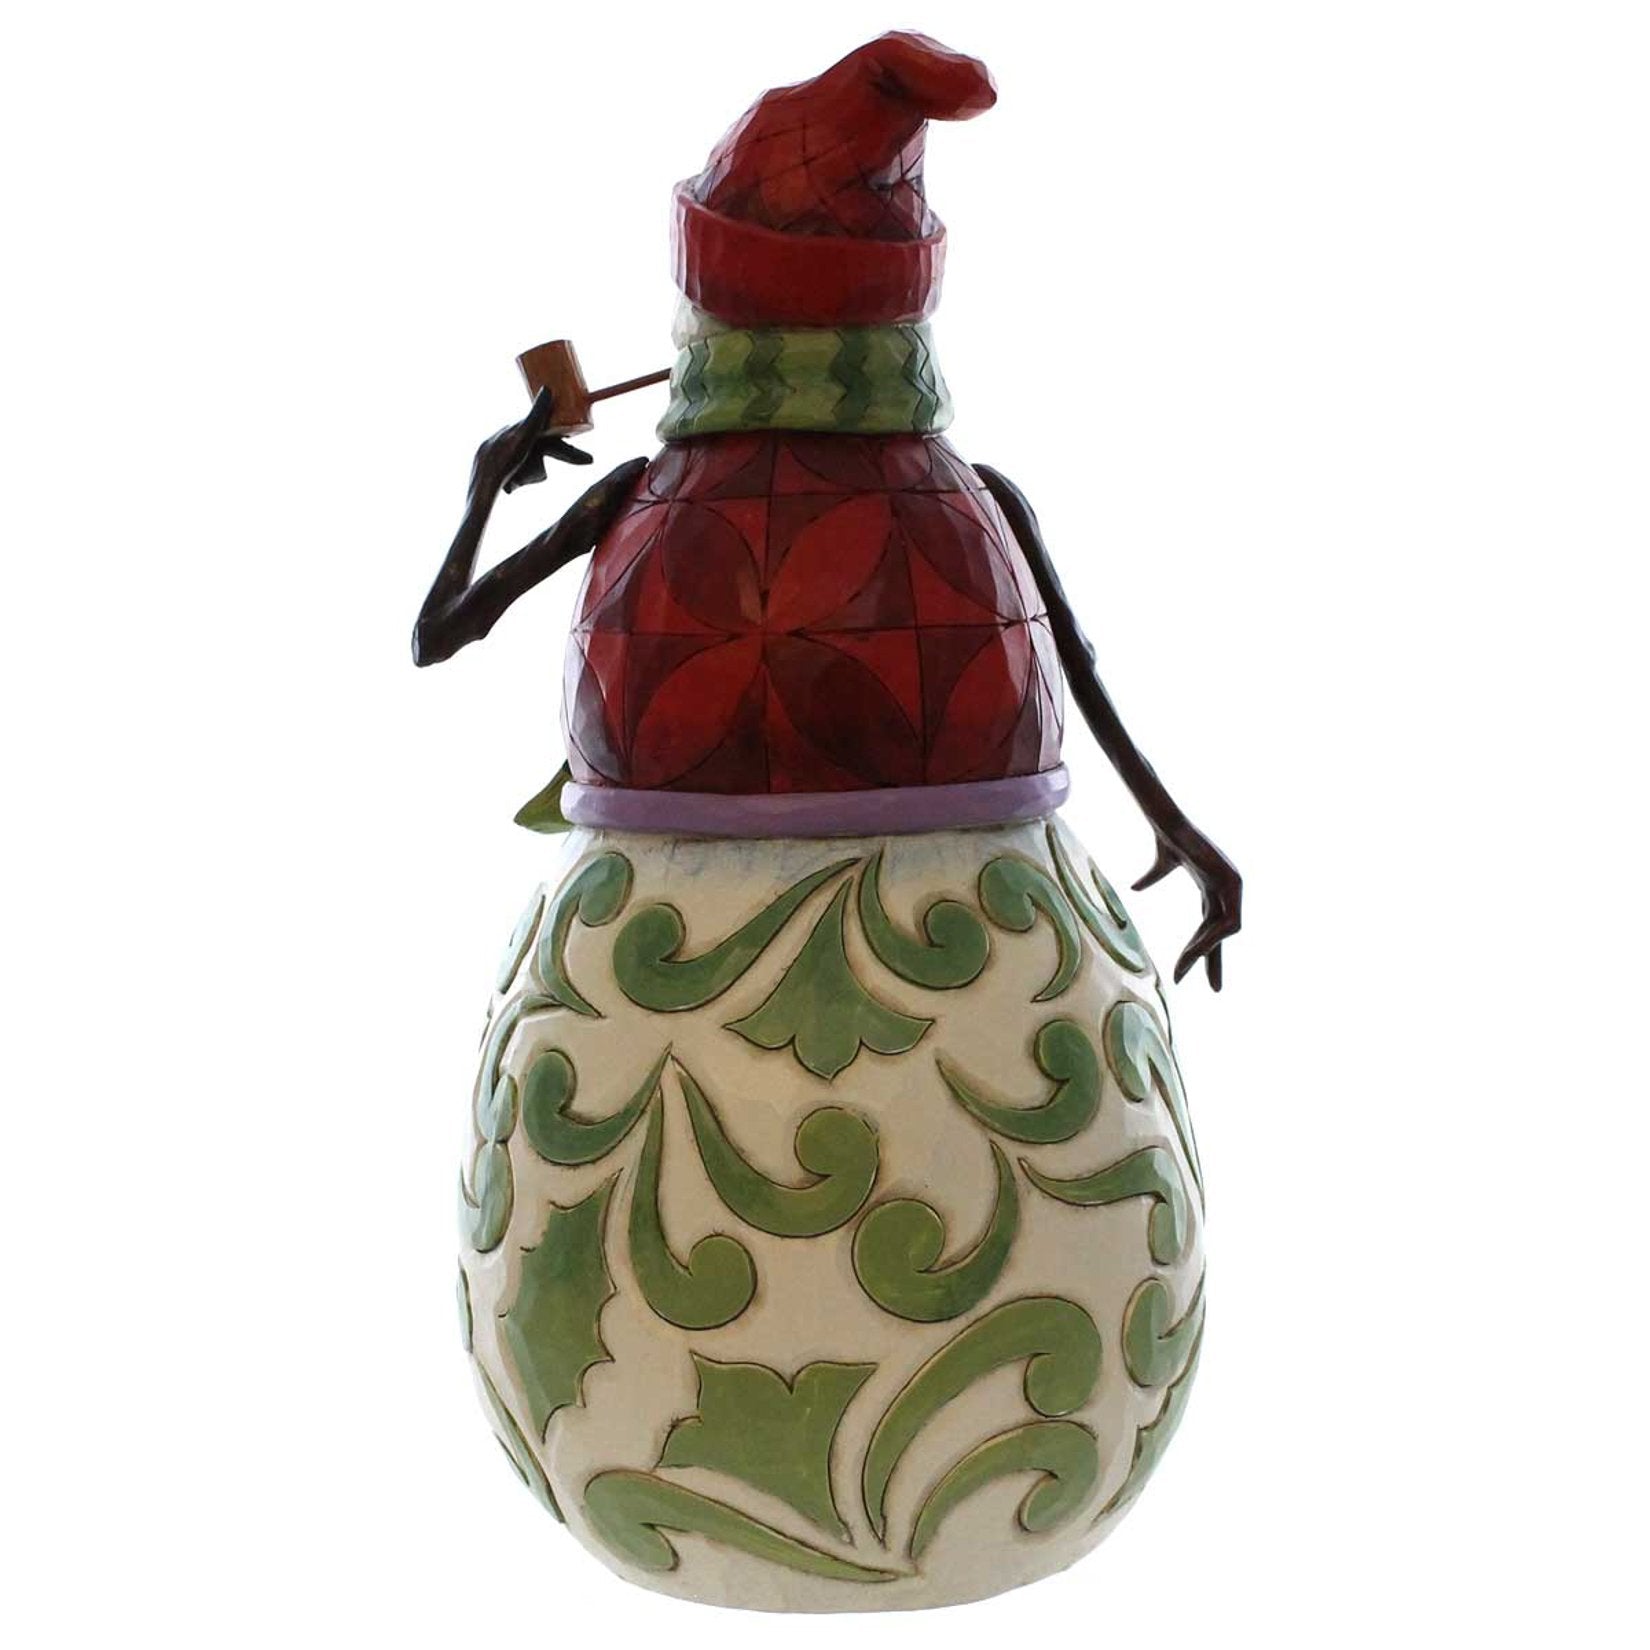 Enesco Jim Shore Heartwood Creek Red and Green Snowman with Pipe Figurine, 9.25-Inch